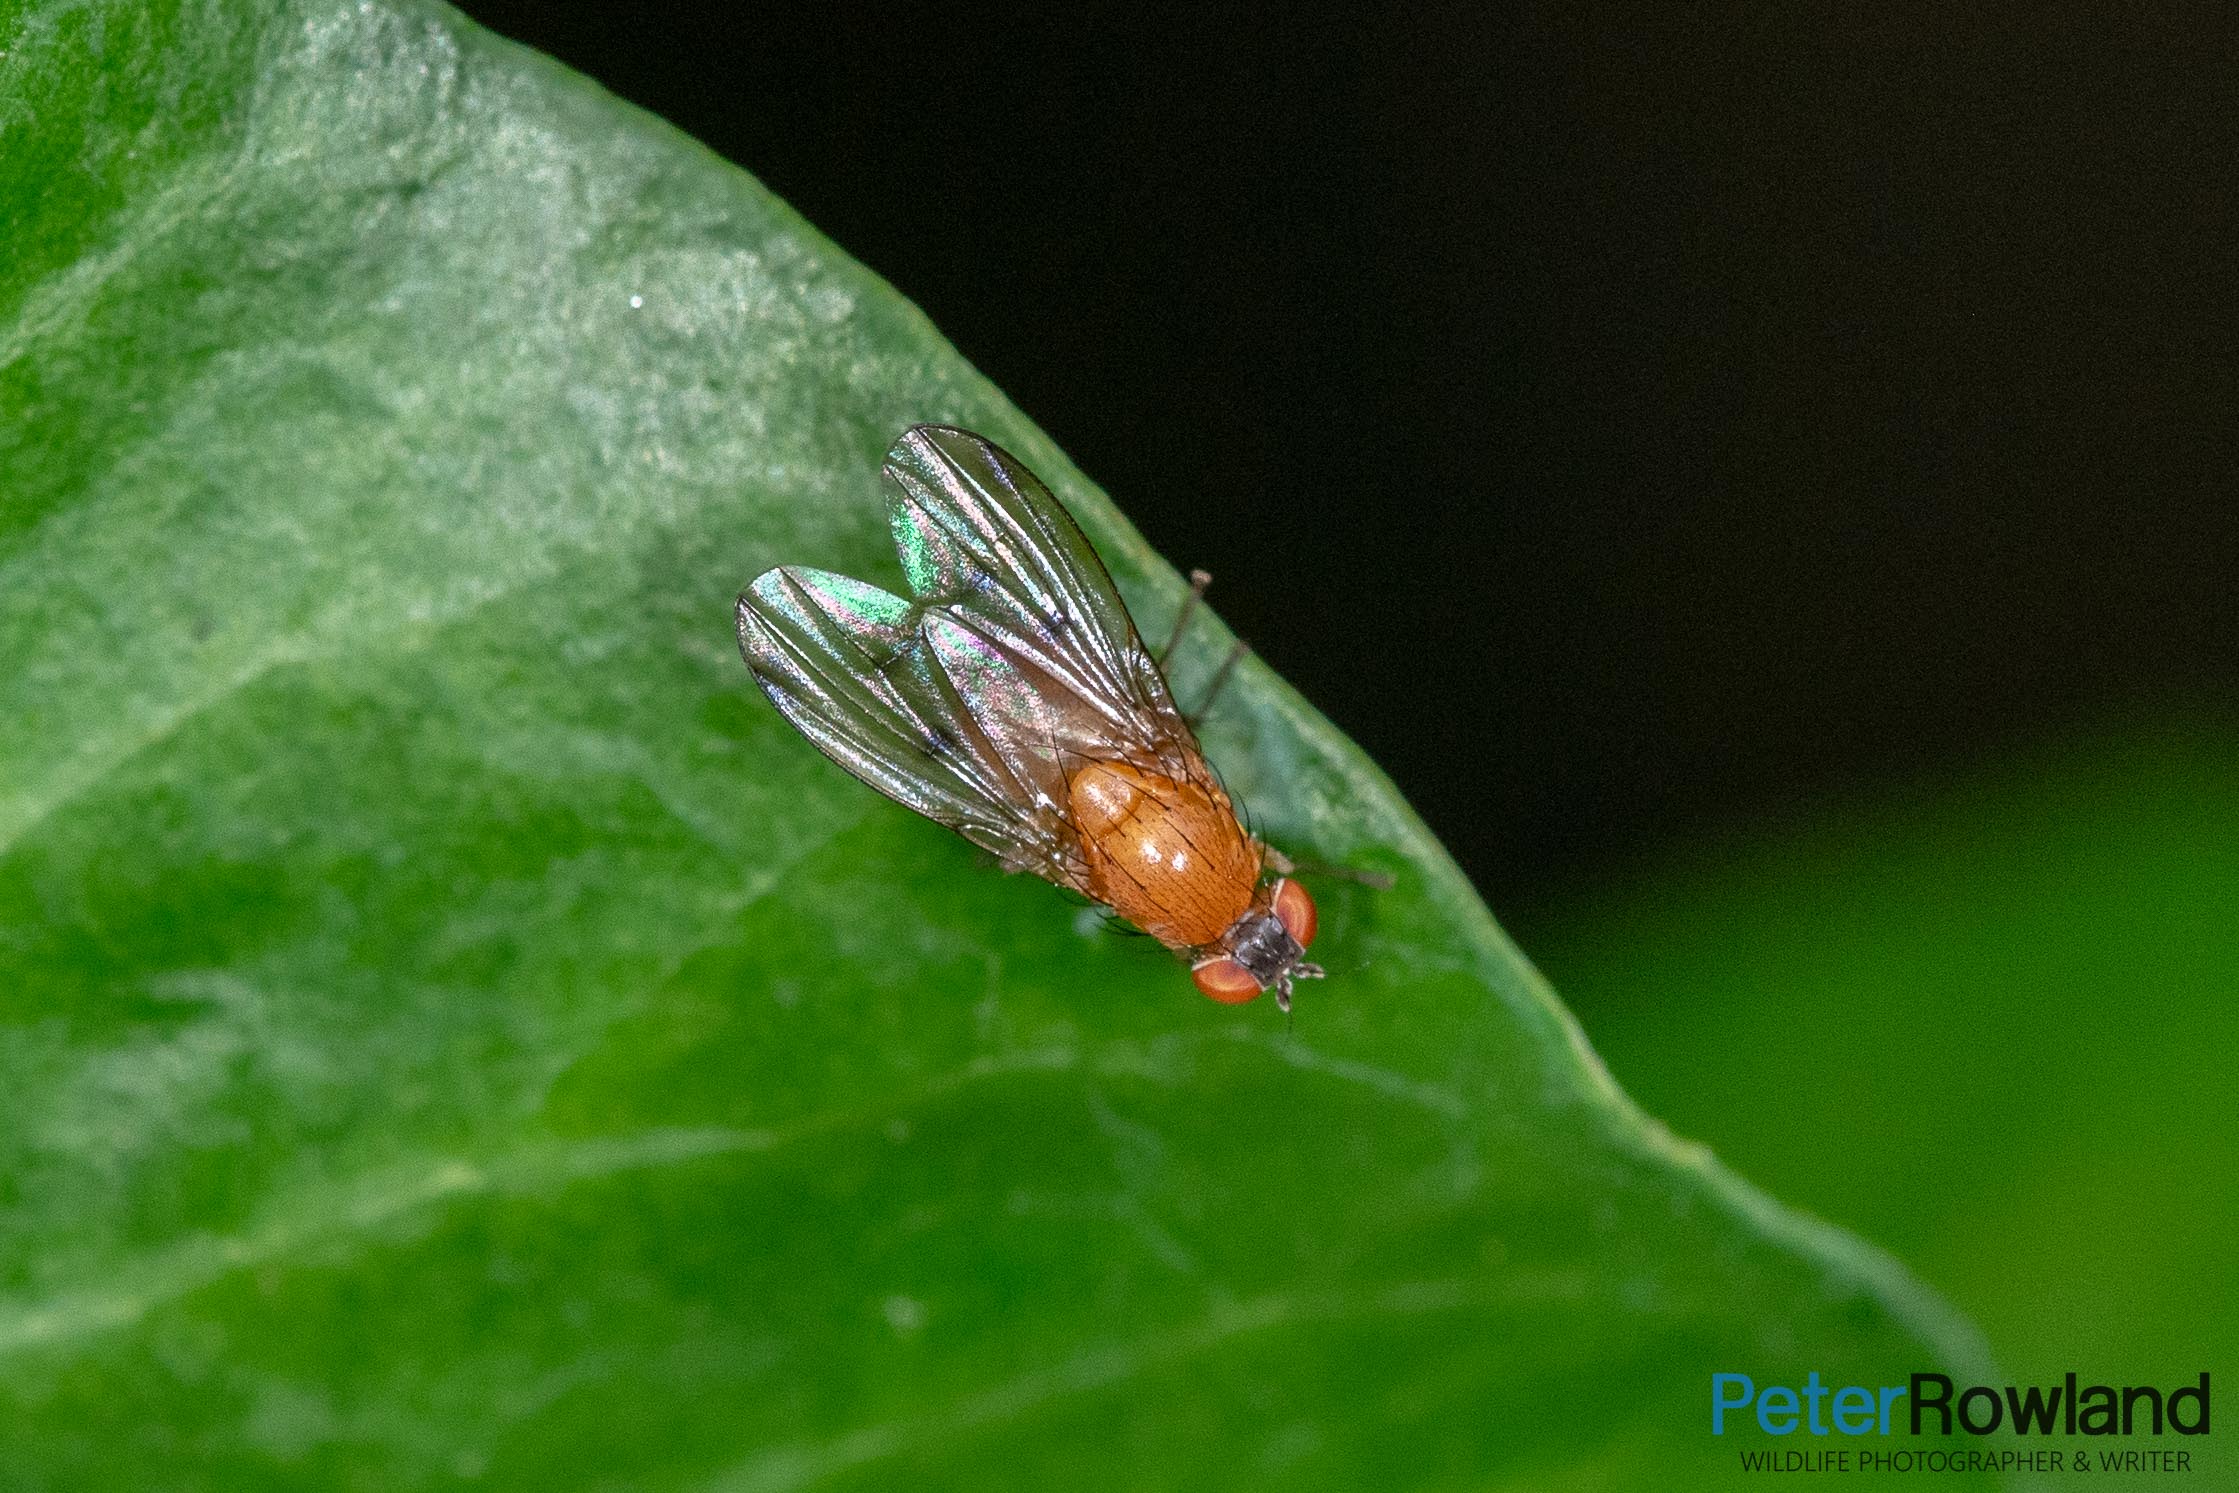 An adult Dotted-winged Lauxaniid Fly on a green leaf